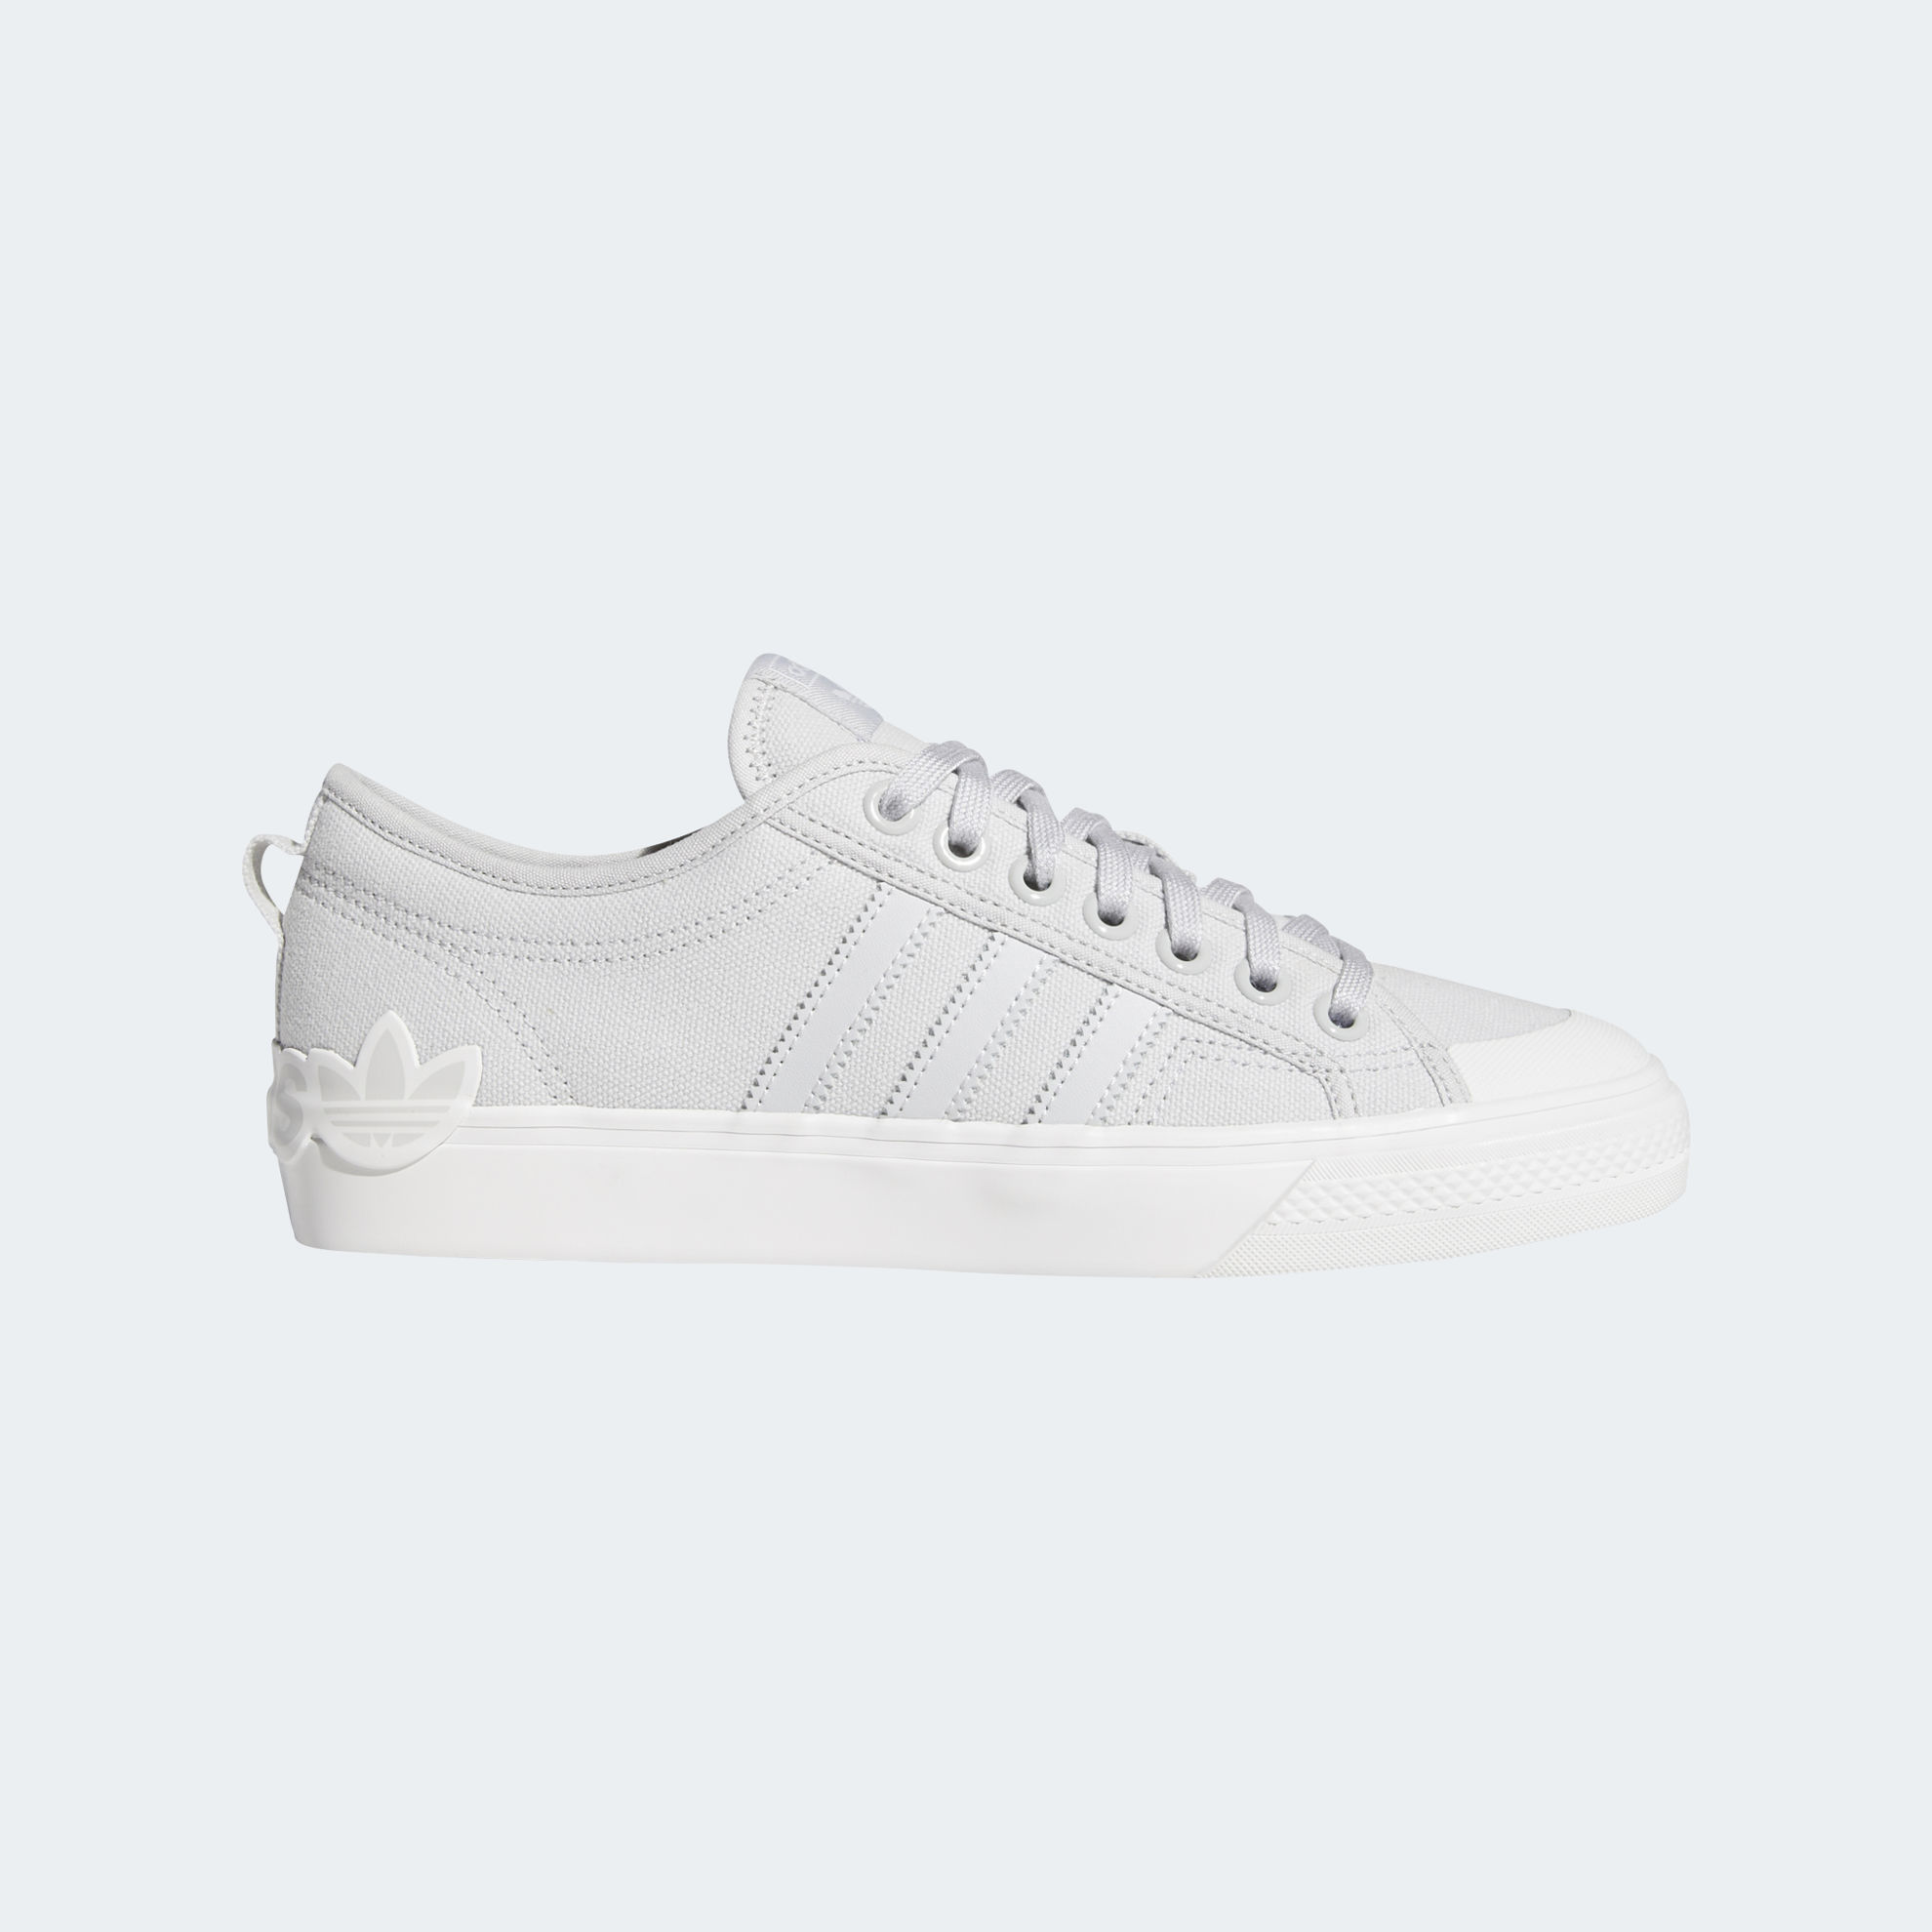 adidas Nizza Shoes | Official Website